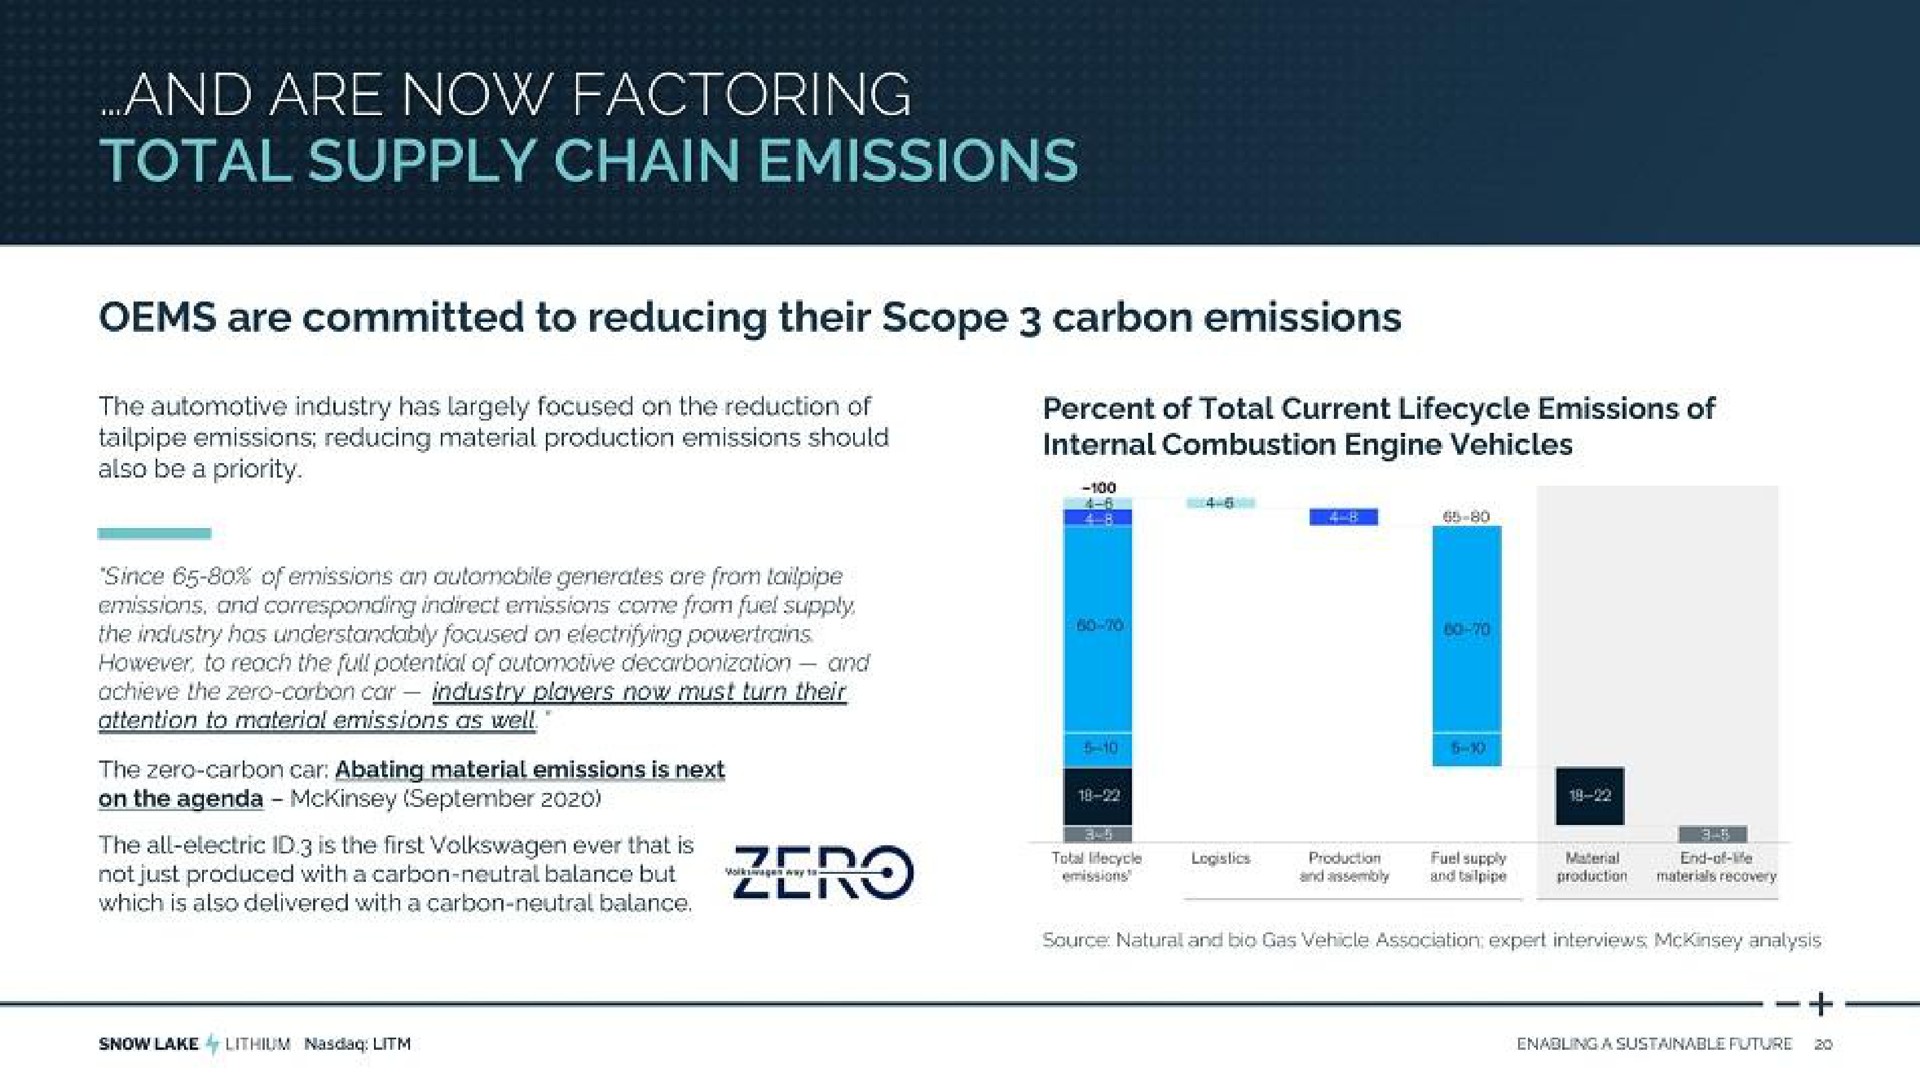 wand are now factoring total supply chain emissions | Snow Lake Resources